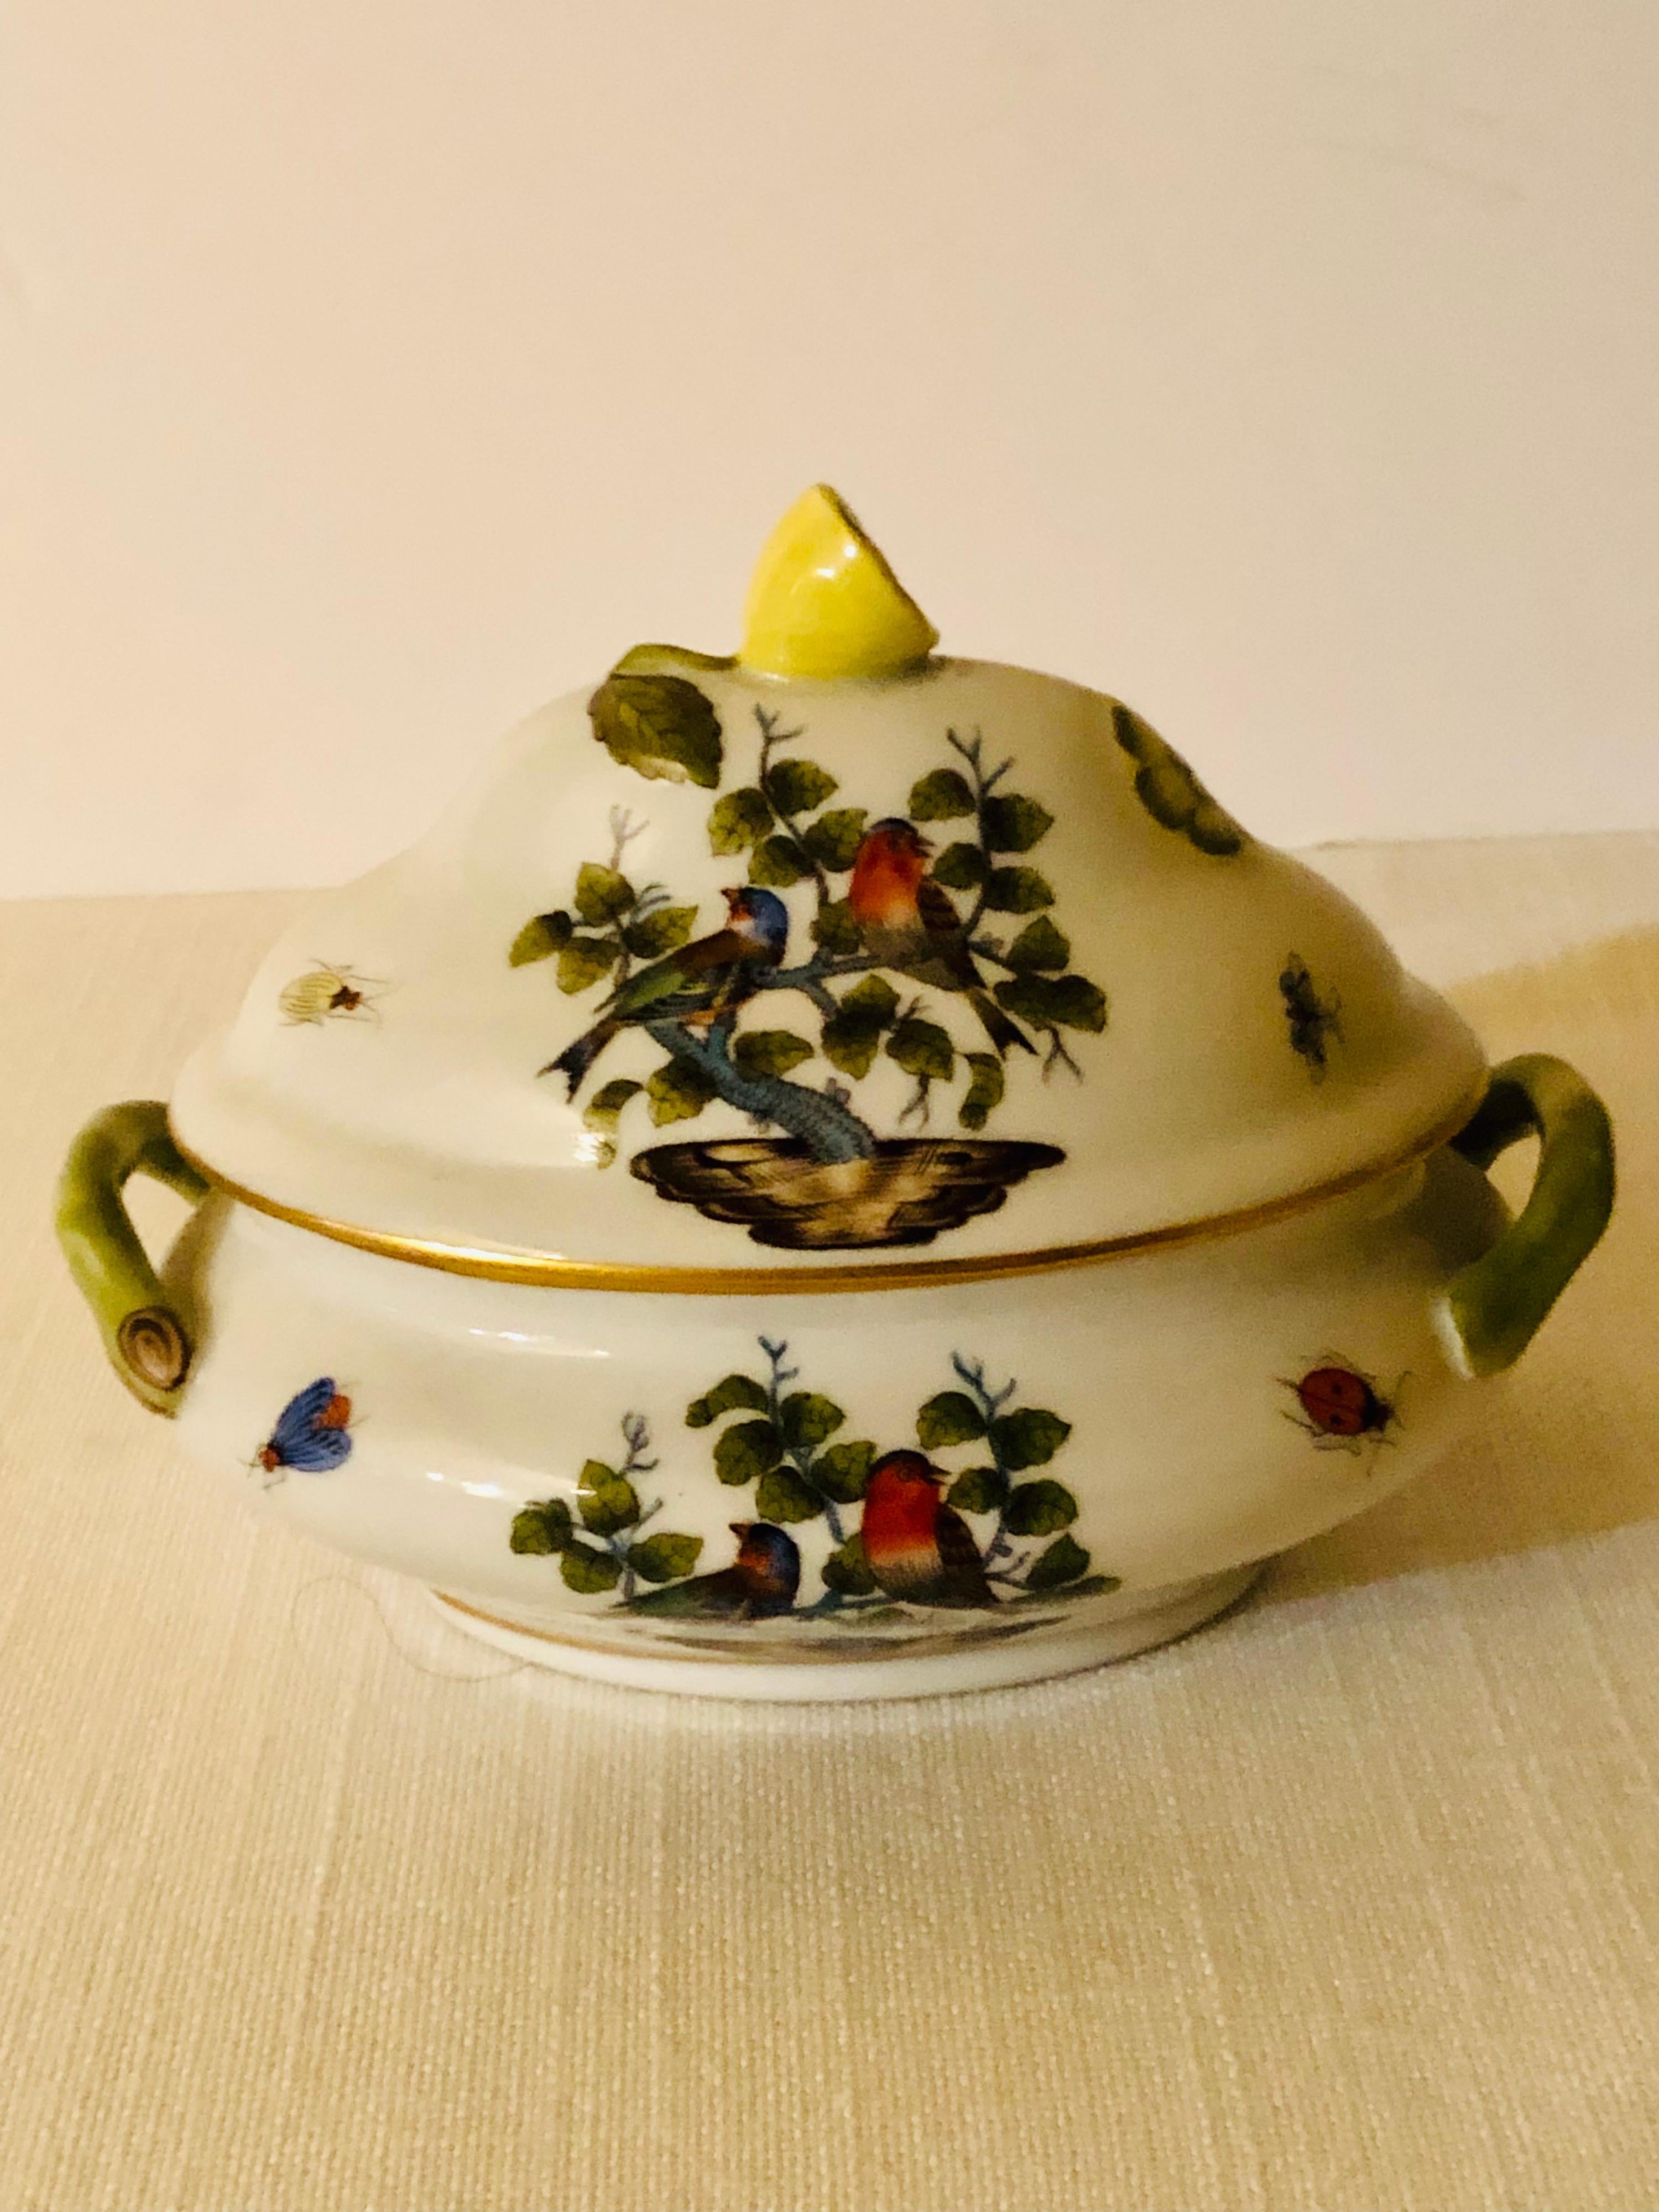 Wonderful antique Rothschild Bird Miniature Tureen painted with pairs of birds, butterflies and insects. The cover of this miniature antique Herend tureen has a raised lemon on top. It is from 1915-1930. It would be a wonderful addition to any